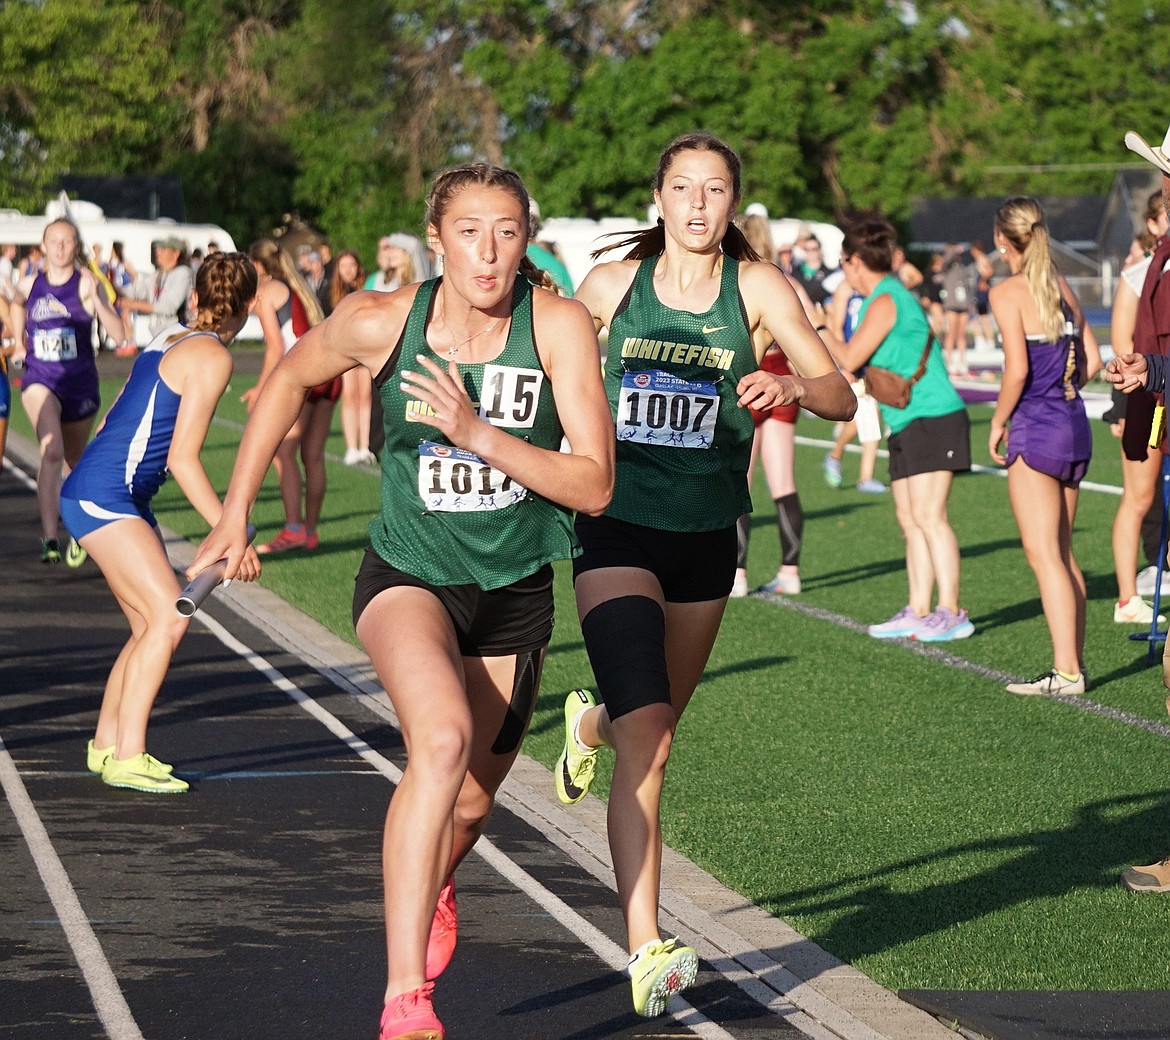 Brooke Zetooney (left) sprints away after receiving the baton from teammate Hailey Ells at the final event of the State Meet. The Whitefish squad easily defeated their nearest competitors completing the relay in 4:00.71, nearly seven seconds ahead of their rivals. (Matt Weller photo)